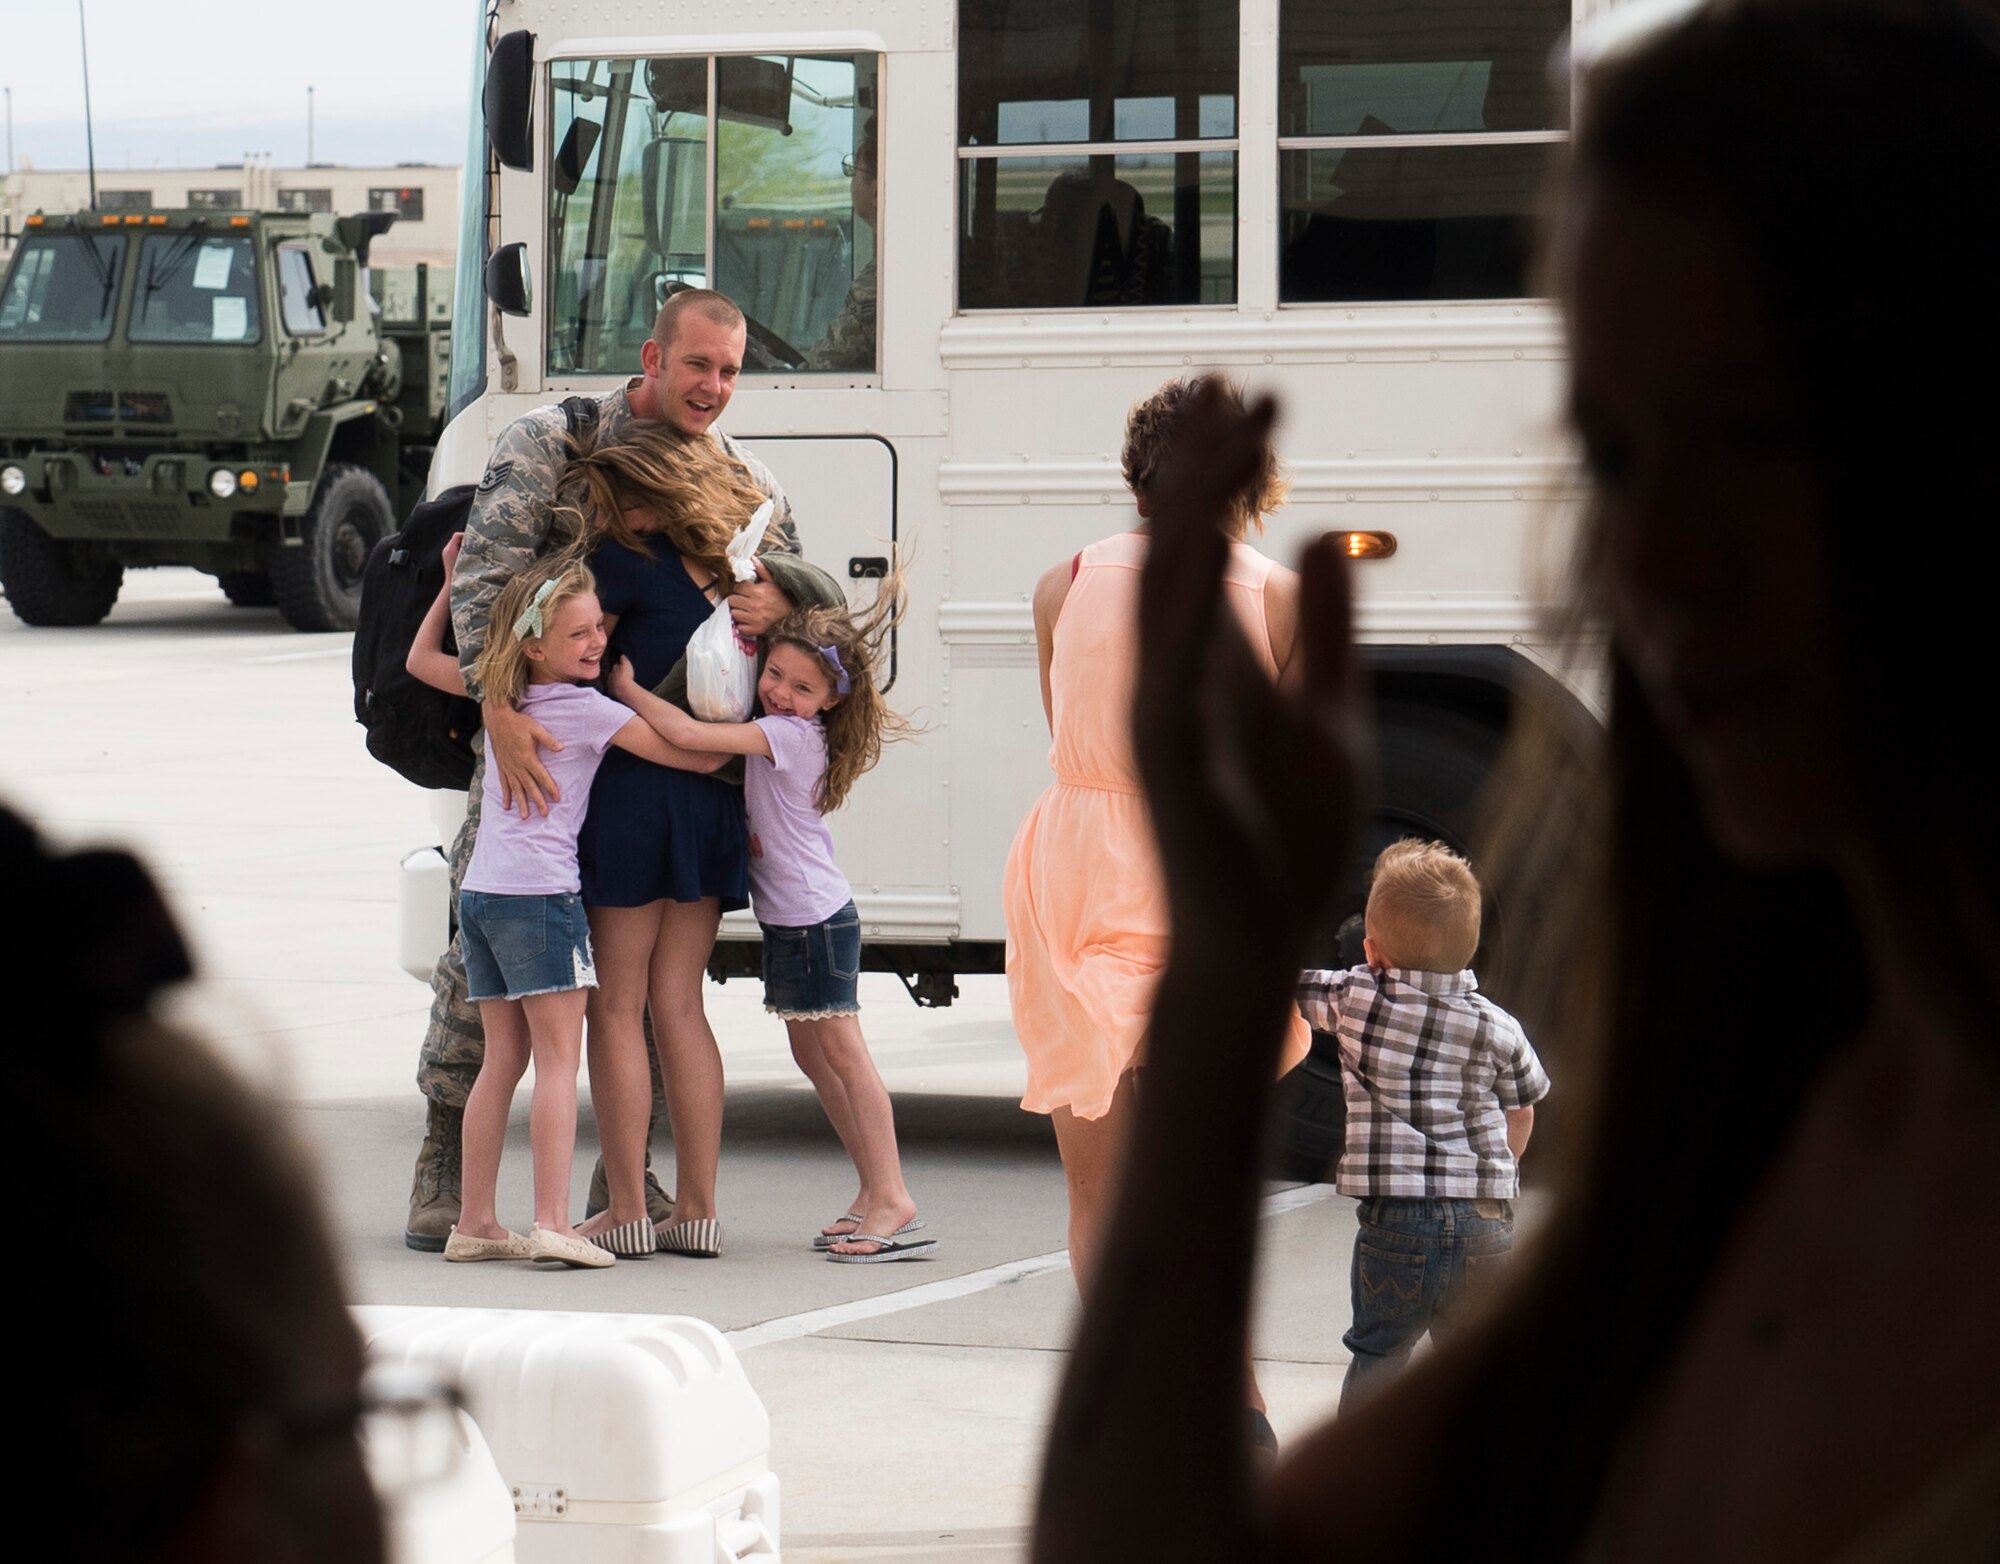 A family reunites at Mountain Home Air Force Base, Idaho, April 22, 2017. More than 100 airmen assigned to the 726th Air Control Squadron returned from a six-month deployment to locations throughout Southwest Asia. The 726th ACS is one of only three active duty control squadrons in the Air Force. (U.S. Air Force photo/Staff Sgt. Samuel Morse)